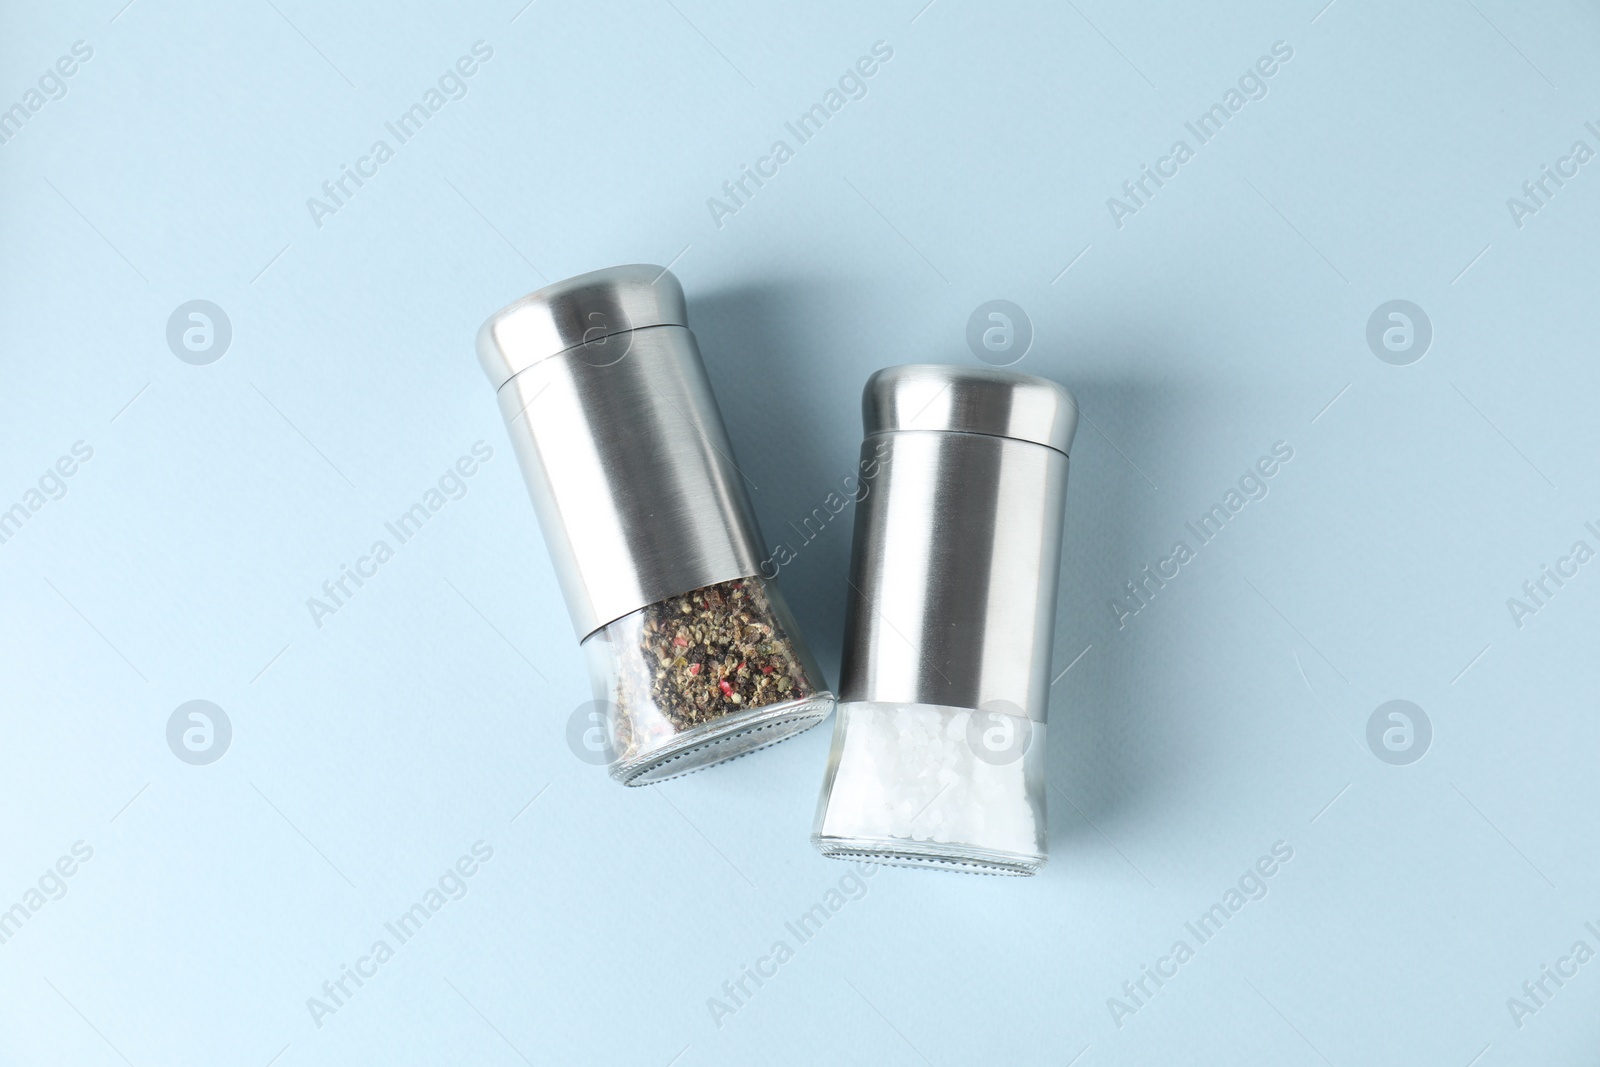 Photo of Salt and pepper shakers on light background, top view